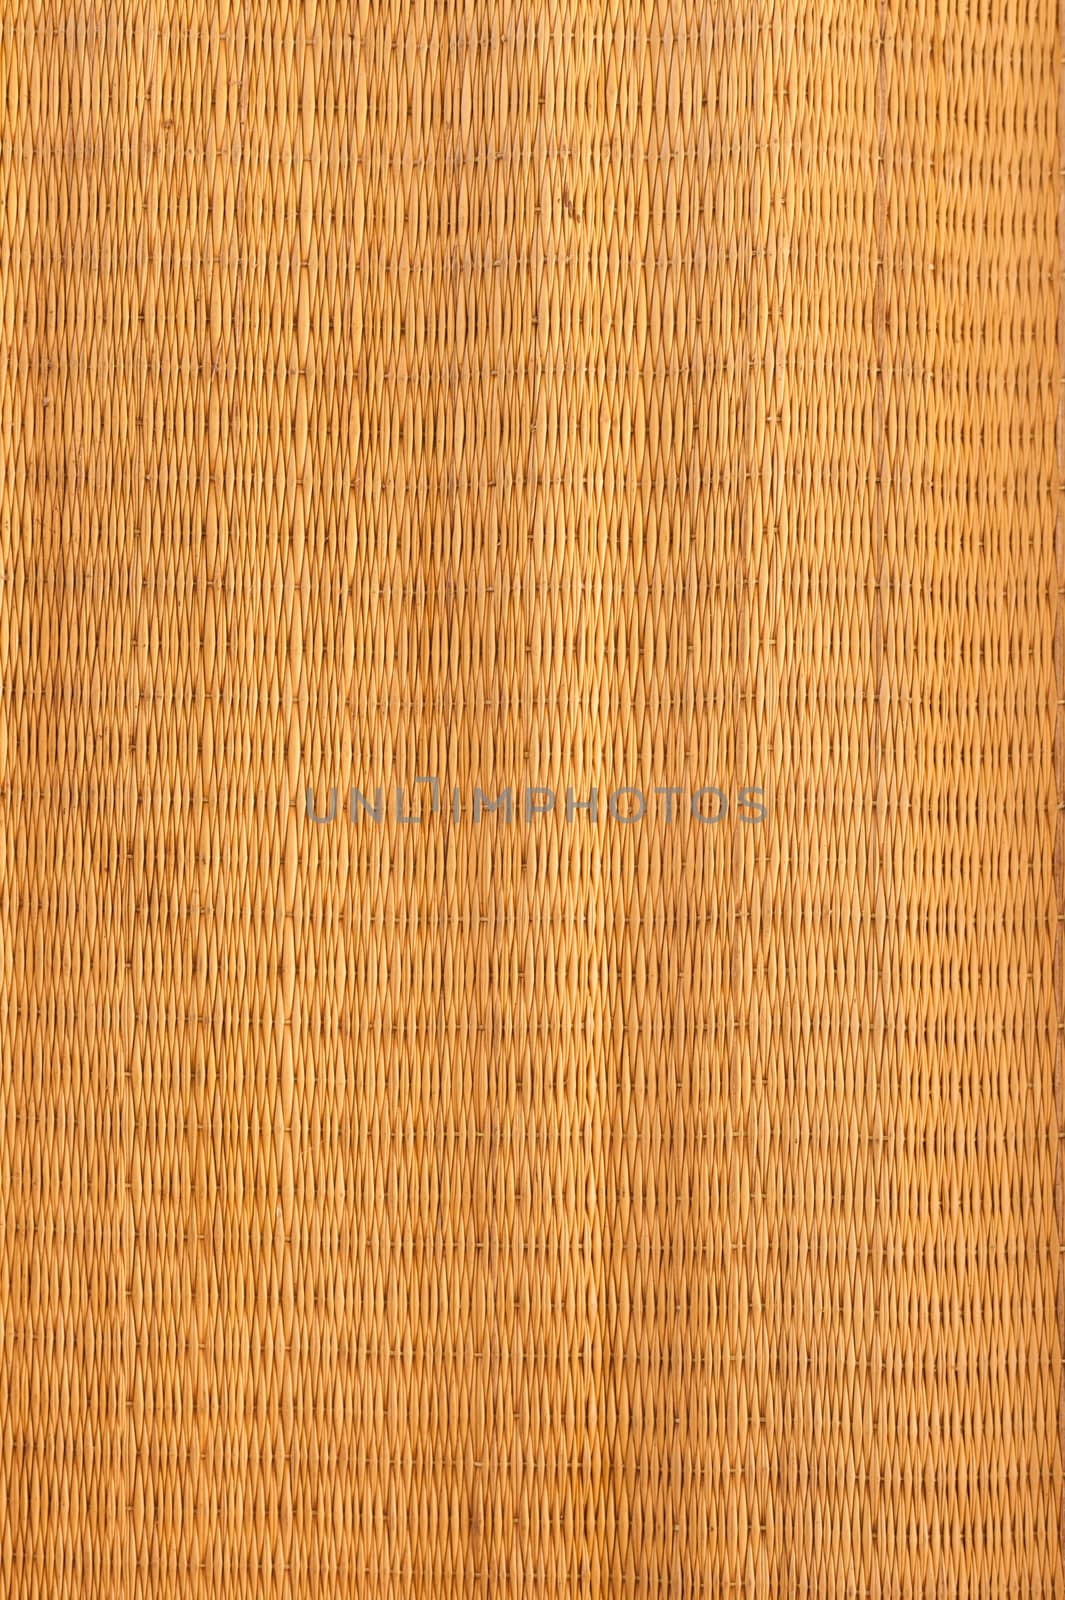 abstract wood mats texture pattern background .